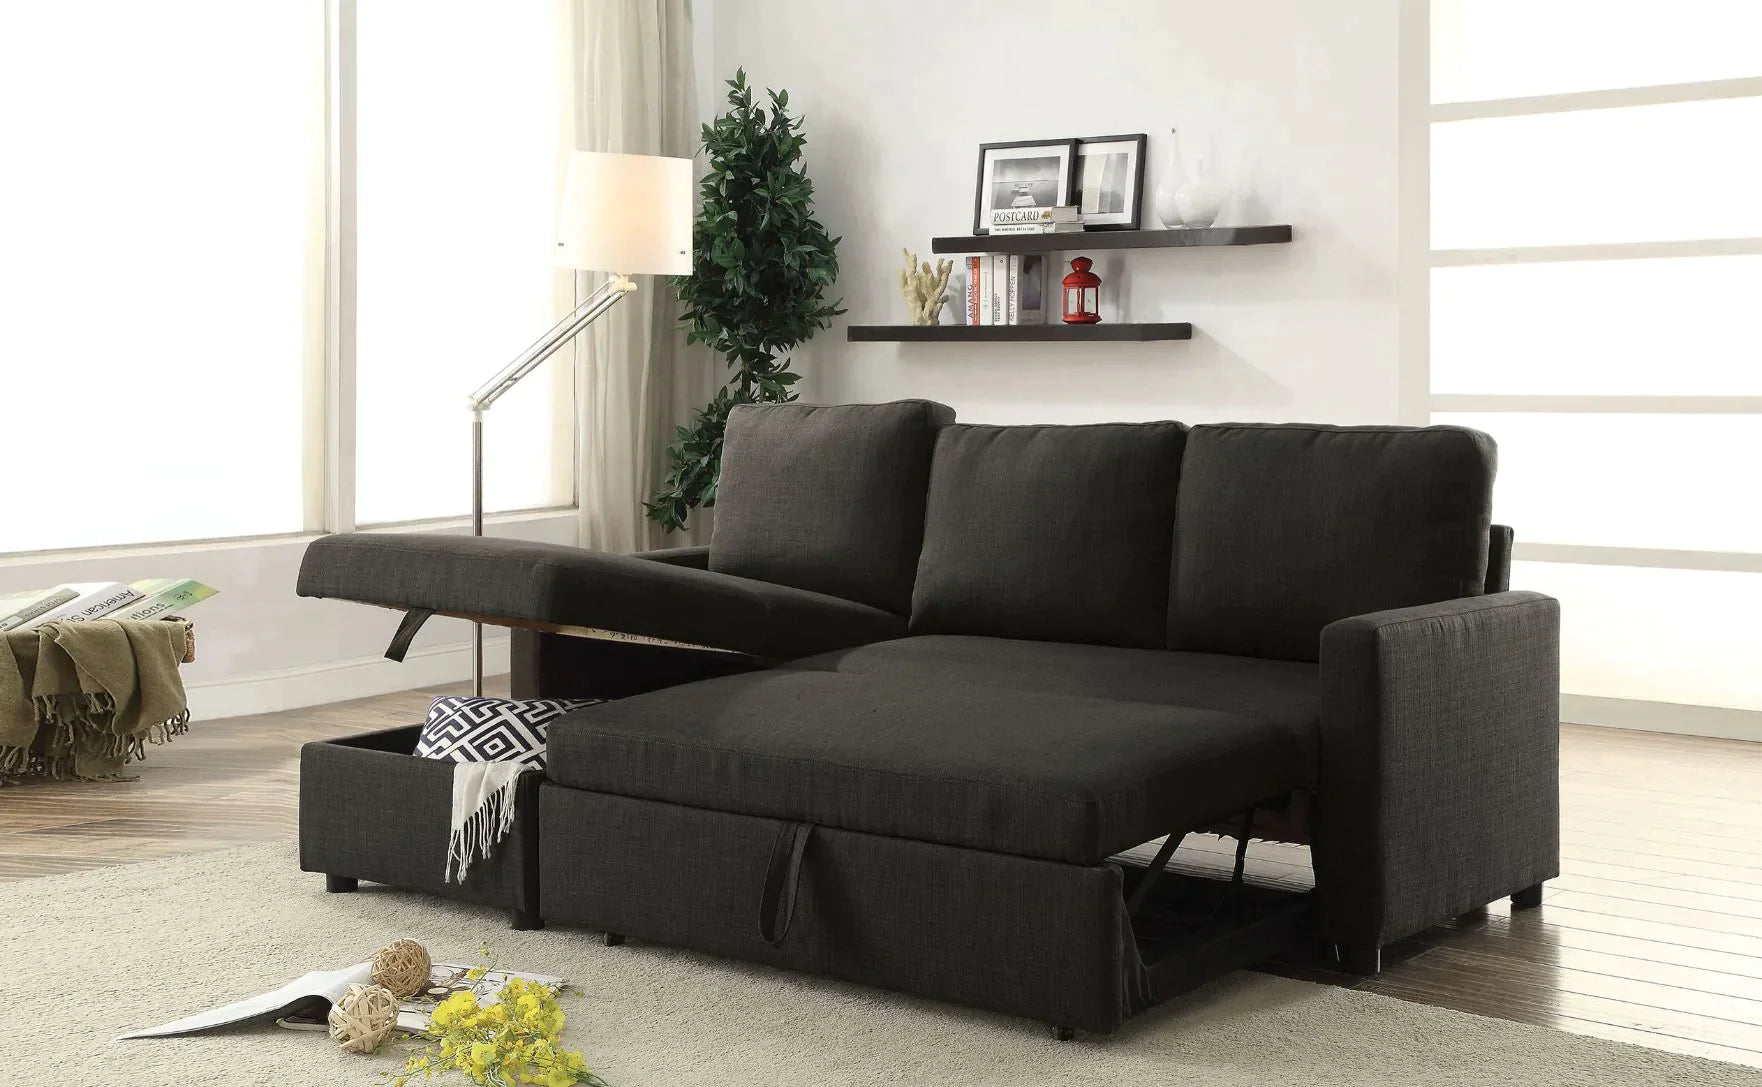 Hiltons Charcoal Linen Sectional Sofa Model 52300 By ACME Furniture